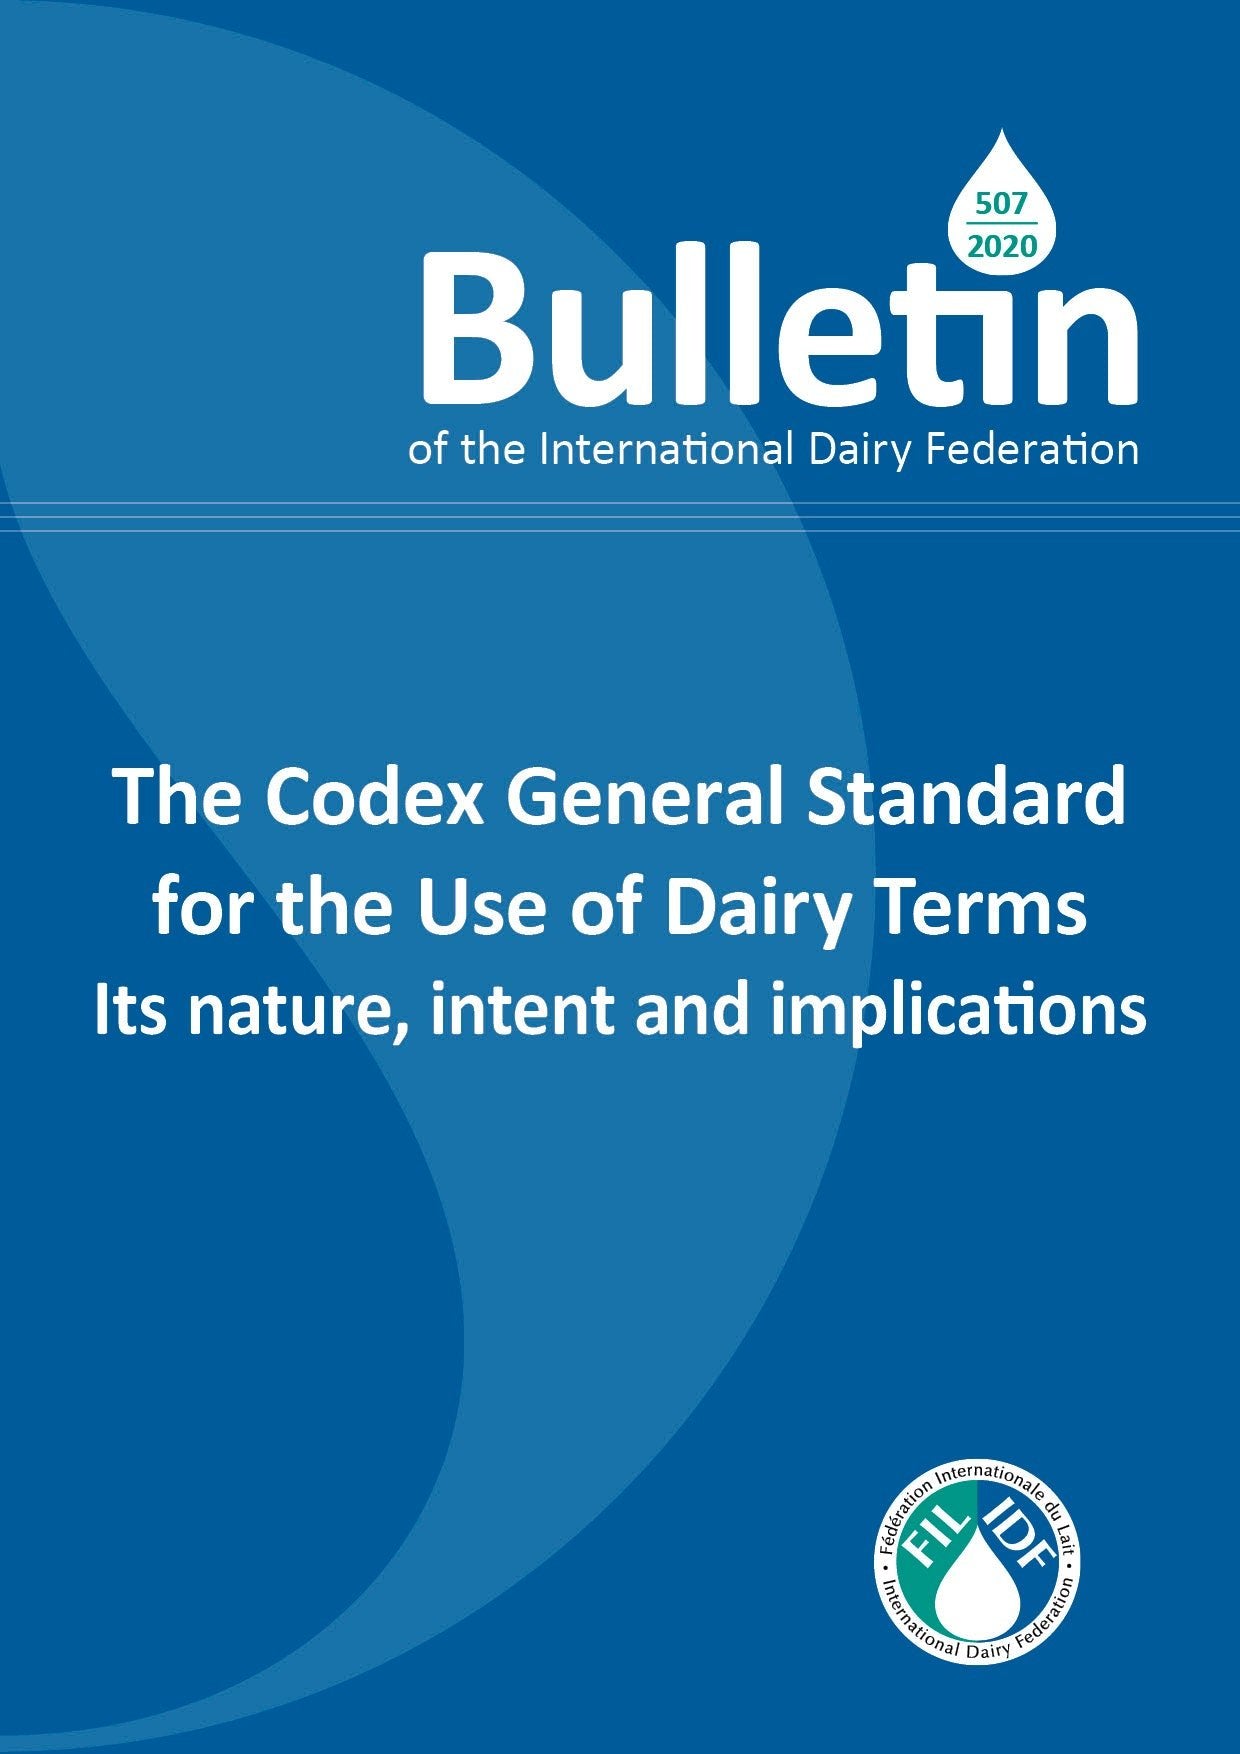 Bulletin of the IDF N° 507/2020: The Codex General Standard for the Use of Dairy Terms Its nature, intent and implications - FIL-IDF